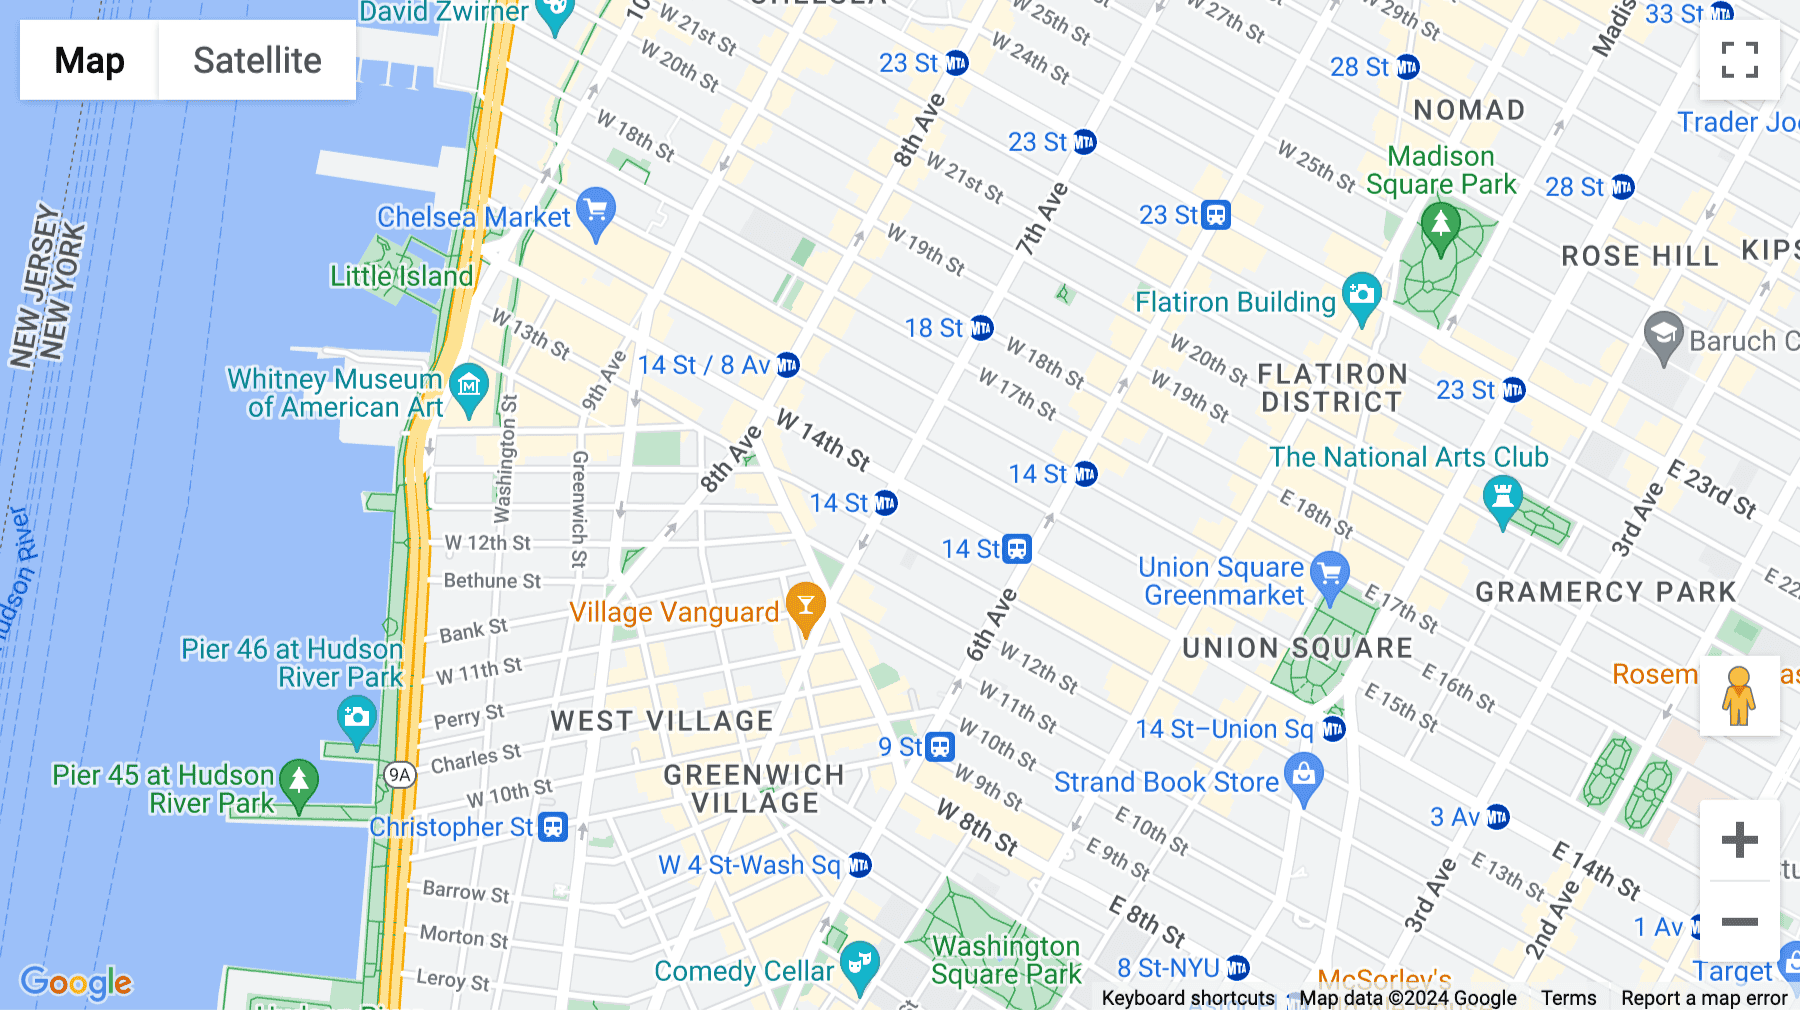 Click for interative map of 154 W 14th Street, New York City